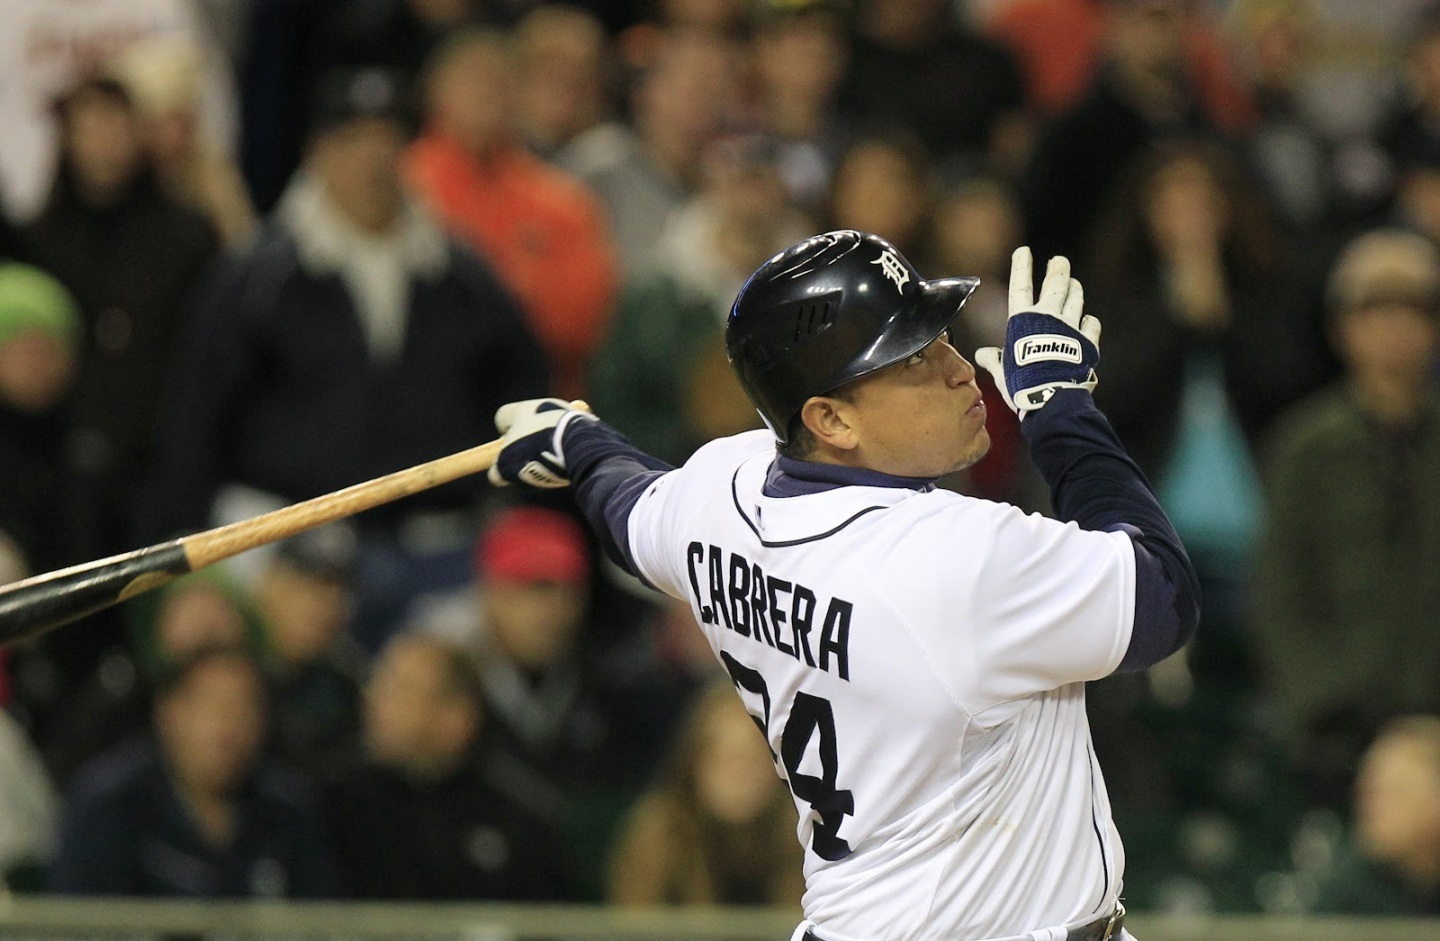 Oag Miguel Cabrera Wallpaper Photo Shared By Jamill Fans Share